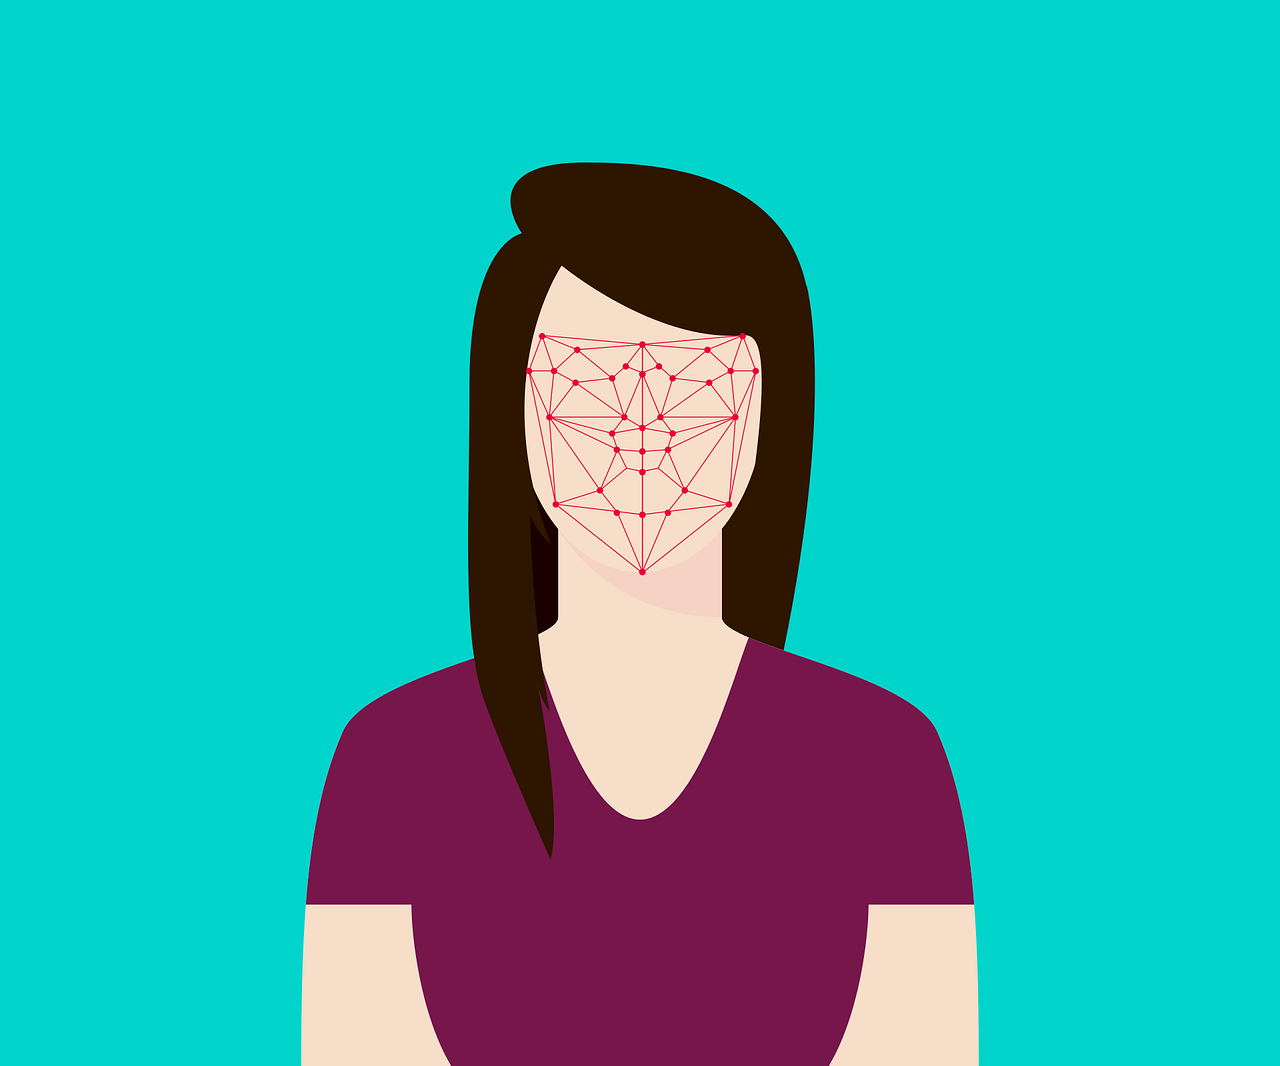 Illustration of a woman's face with a matrix mapping key points on her face for facial recognition